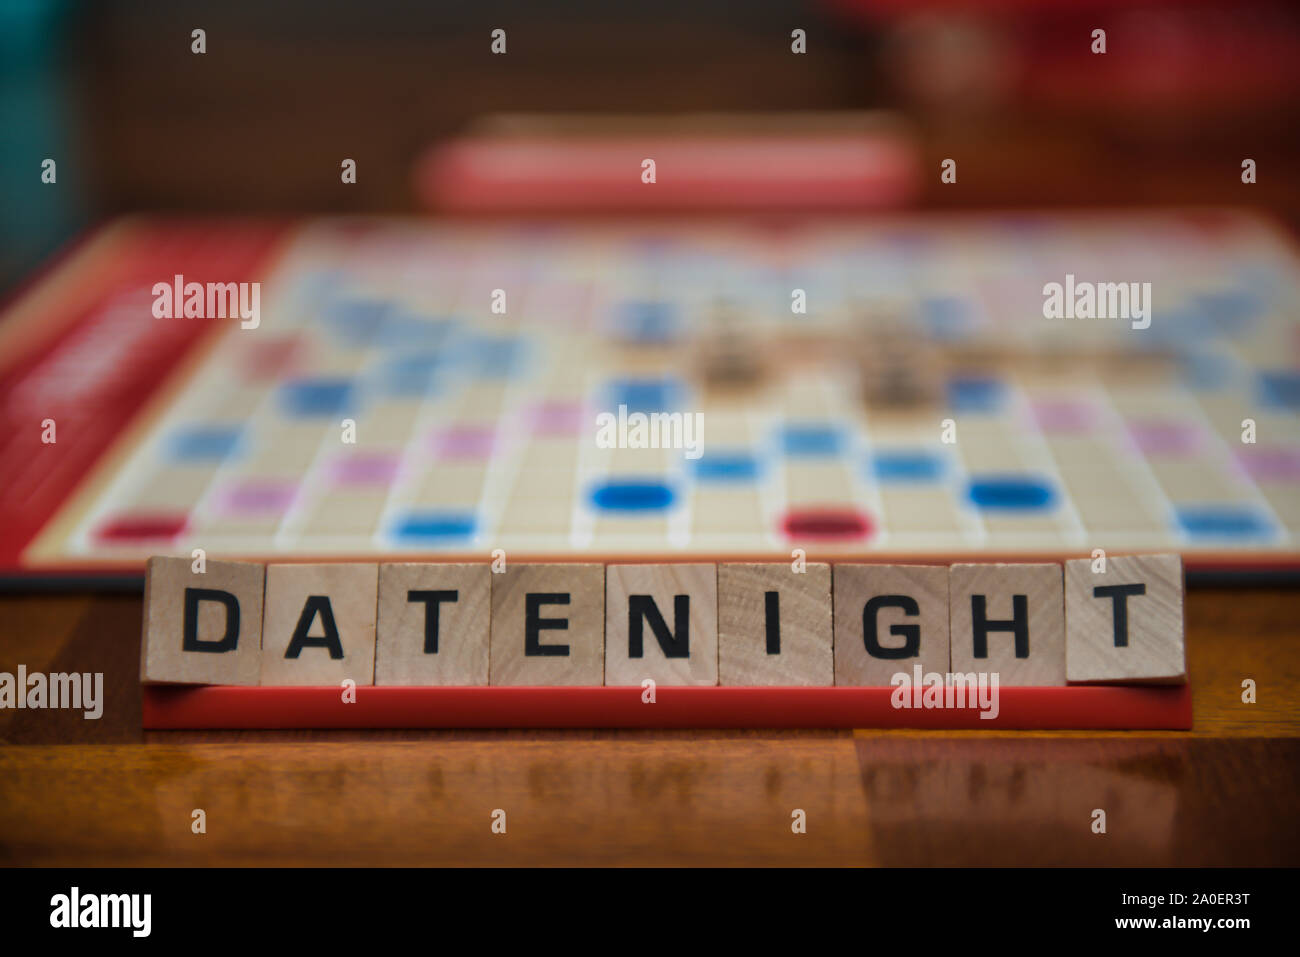 Letter tiles spelling out the words date night on stand in the foreground with out of focus game board in the background. Stock Photo